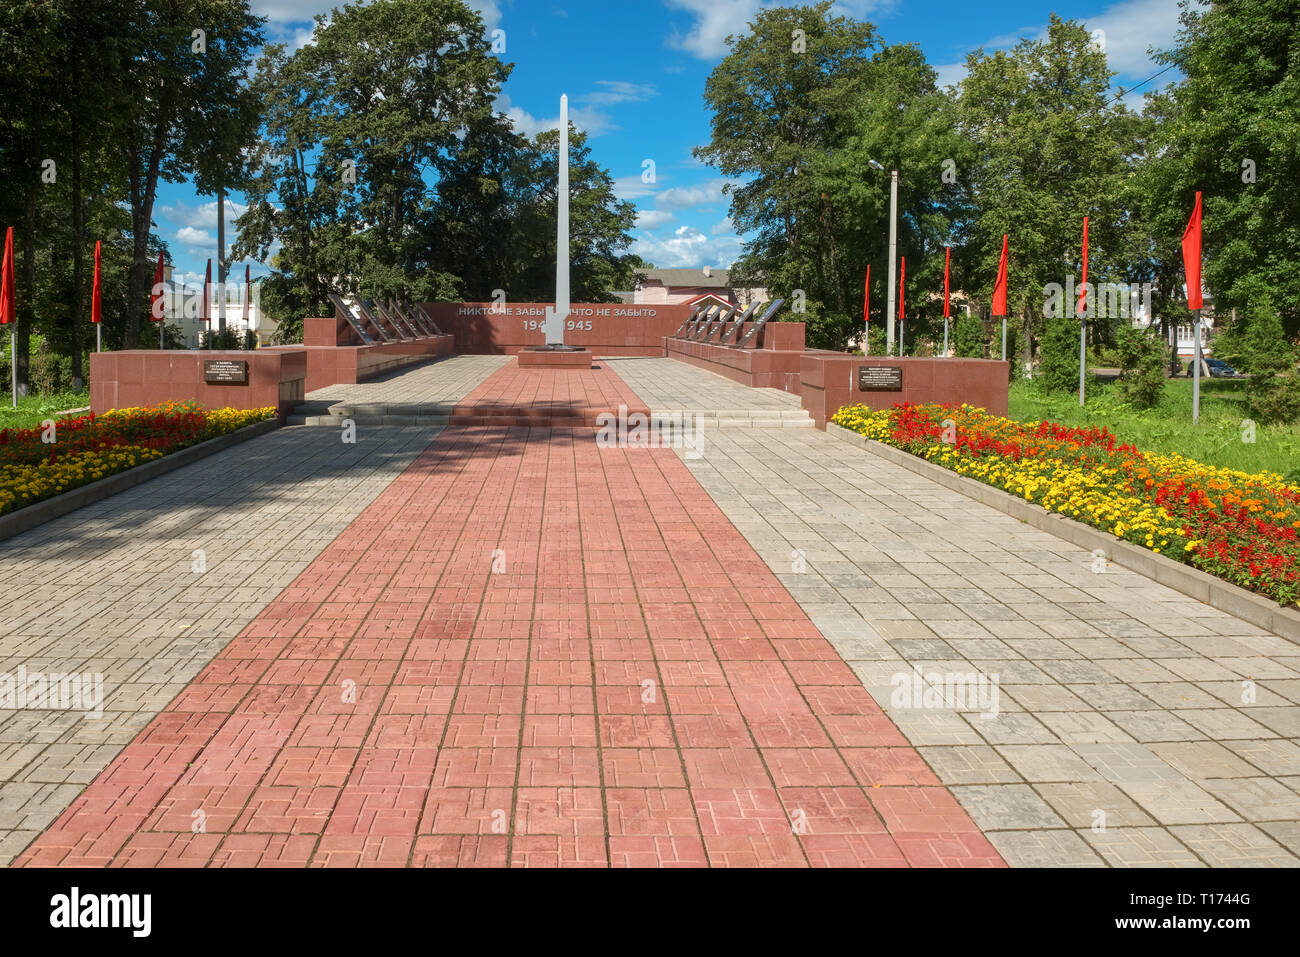 Borovichi, Russia - August 8, 2018: Eternal Flame - a memorial complex in the central park of the city. Dedicated to the memory of victims of World Wa Stock Photo